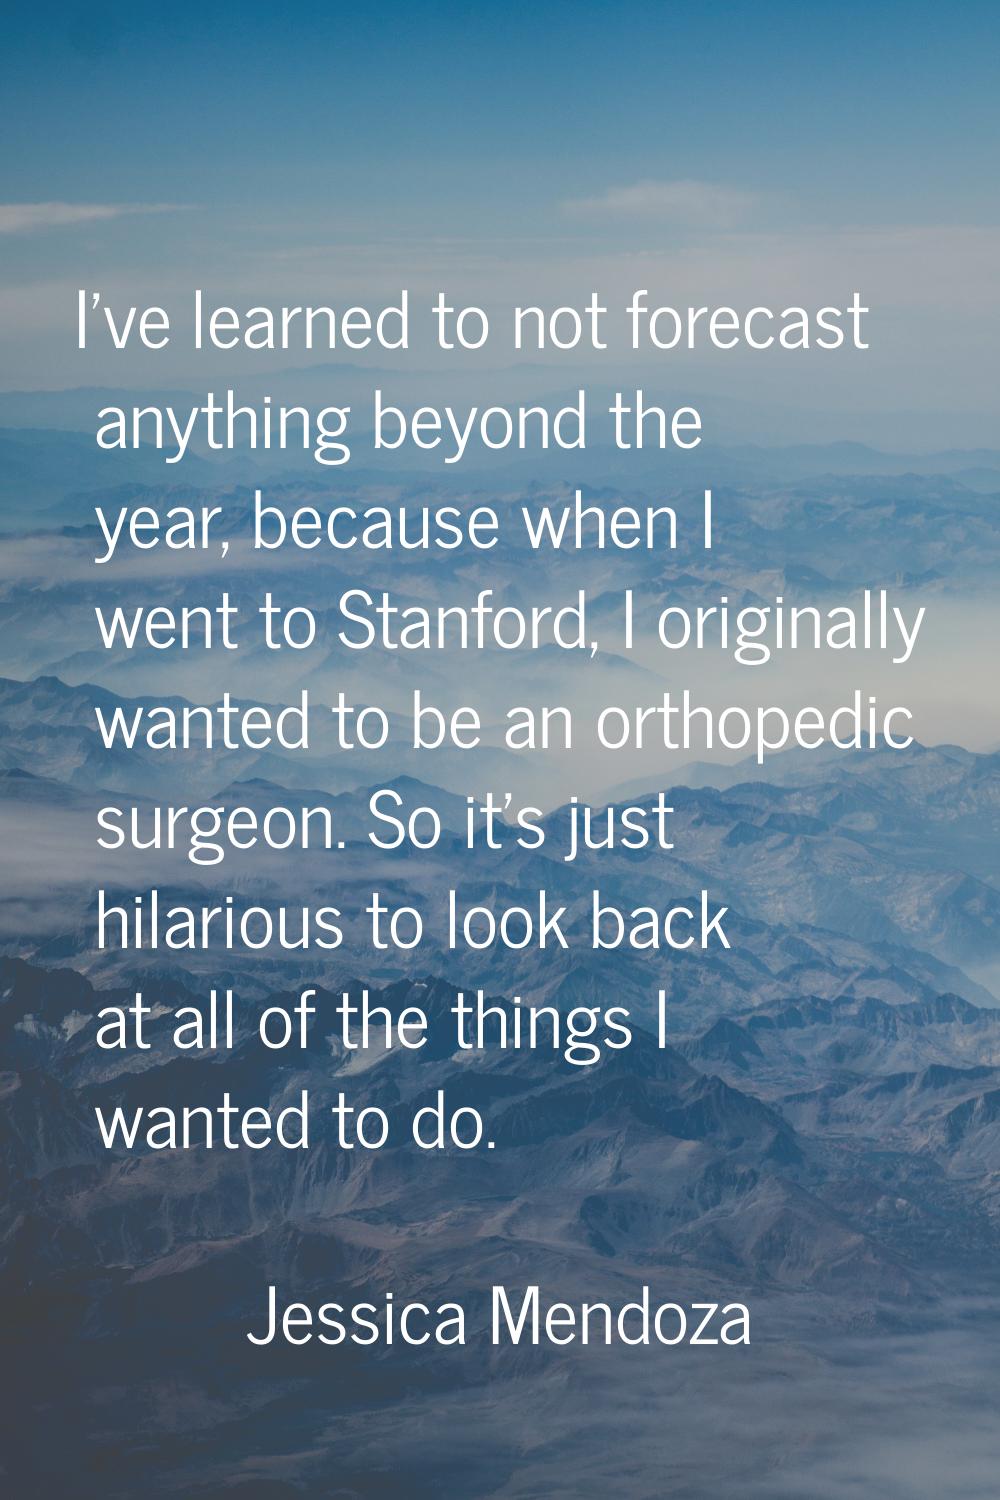 I've learned to not forecast anything beyond the year, because when I went to Stanford, I originall